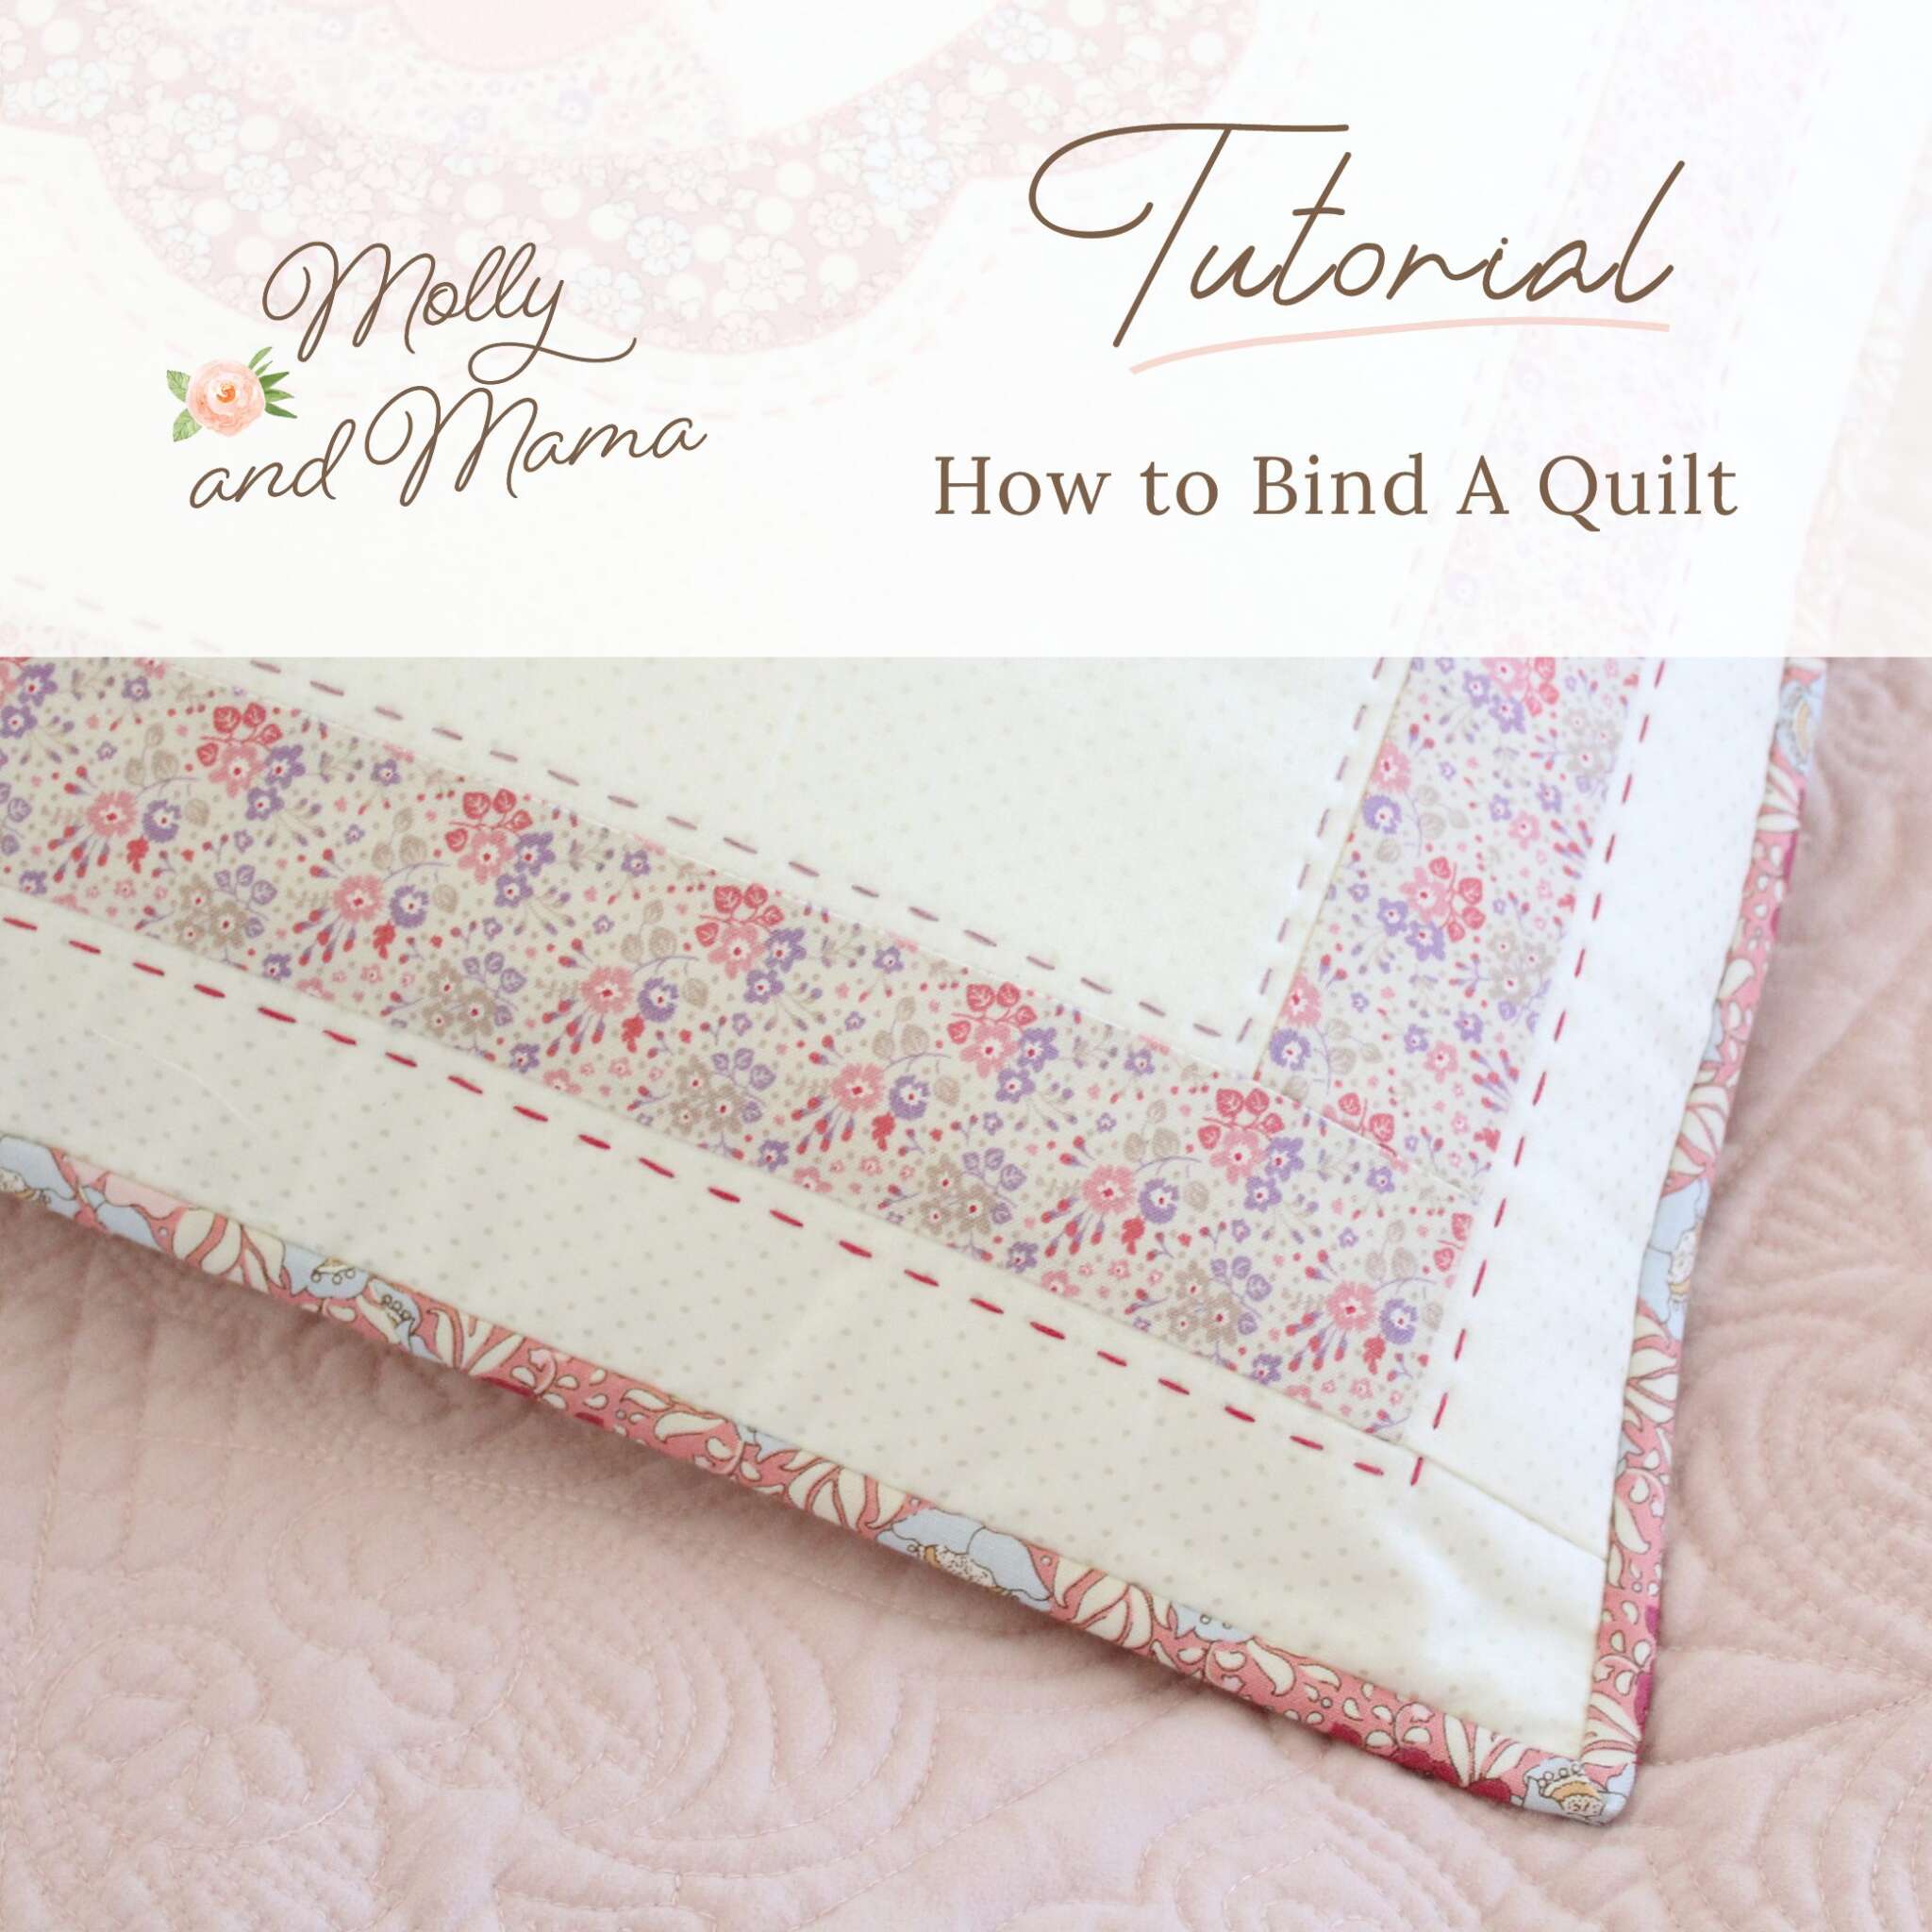 How To Bind A Quilt - Molly and Mama